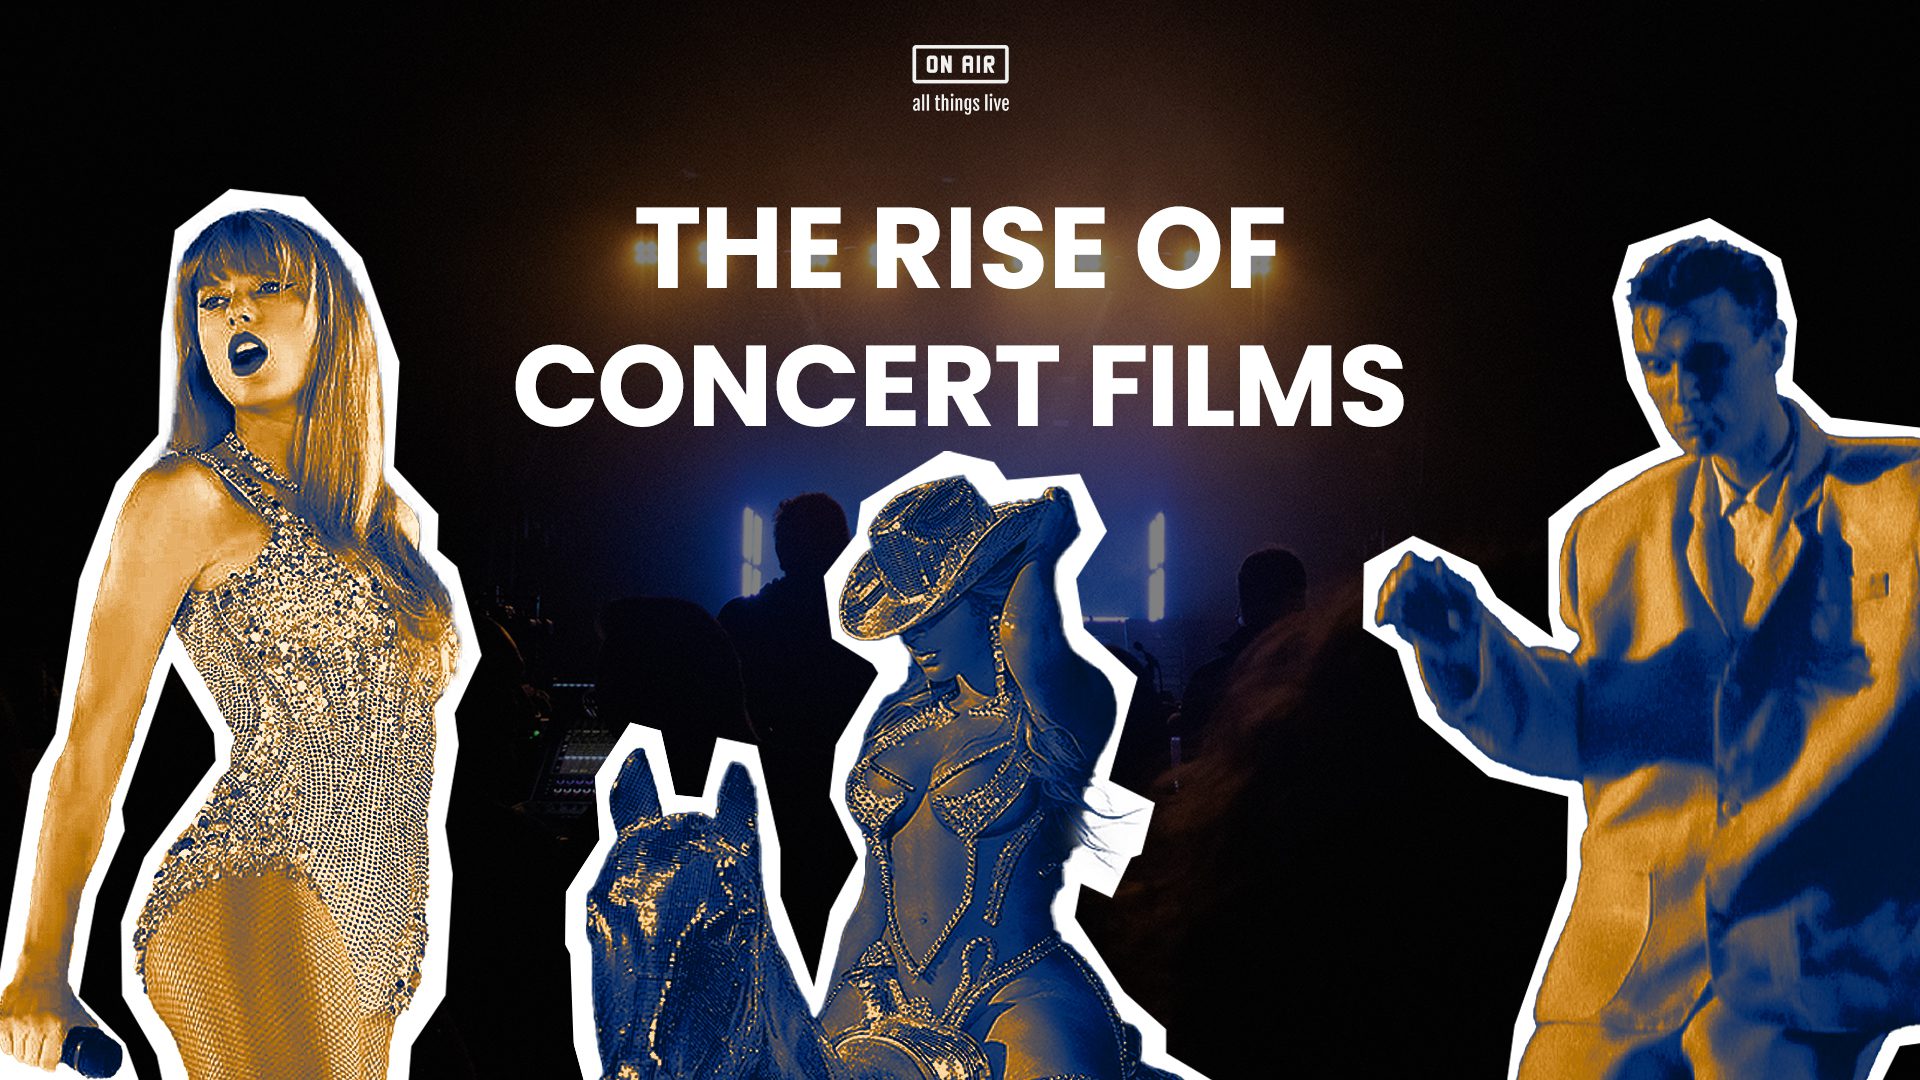 The rise of concert films